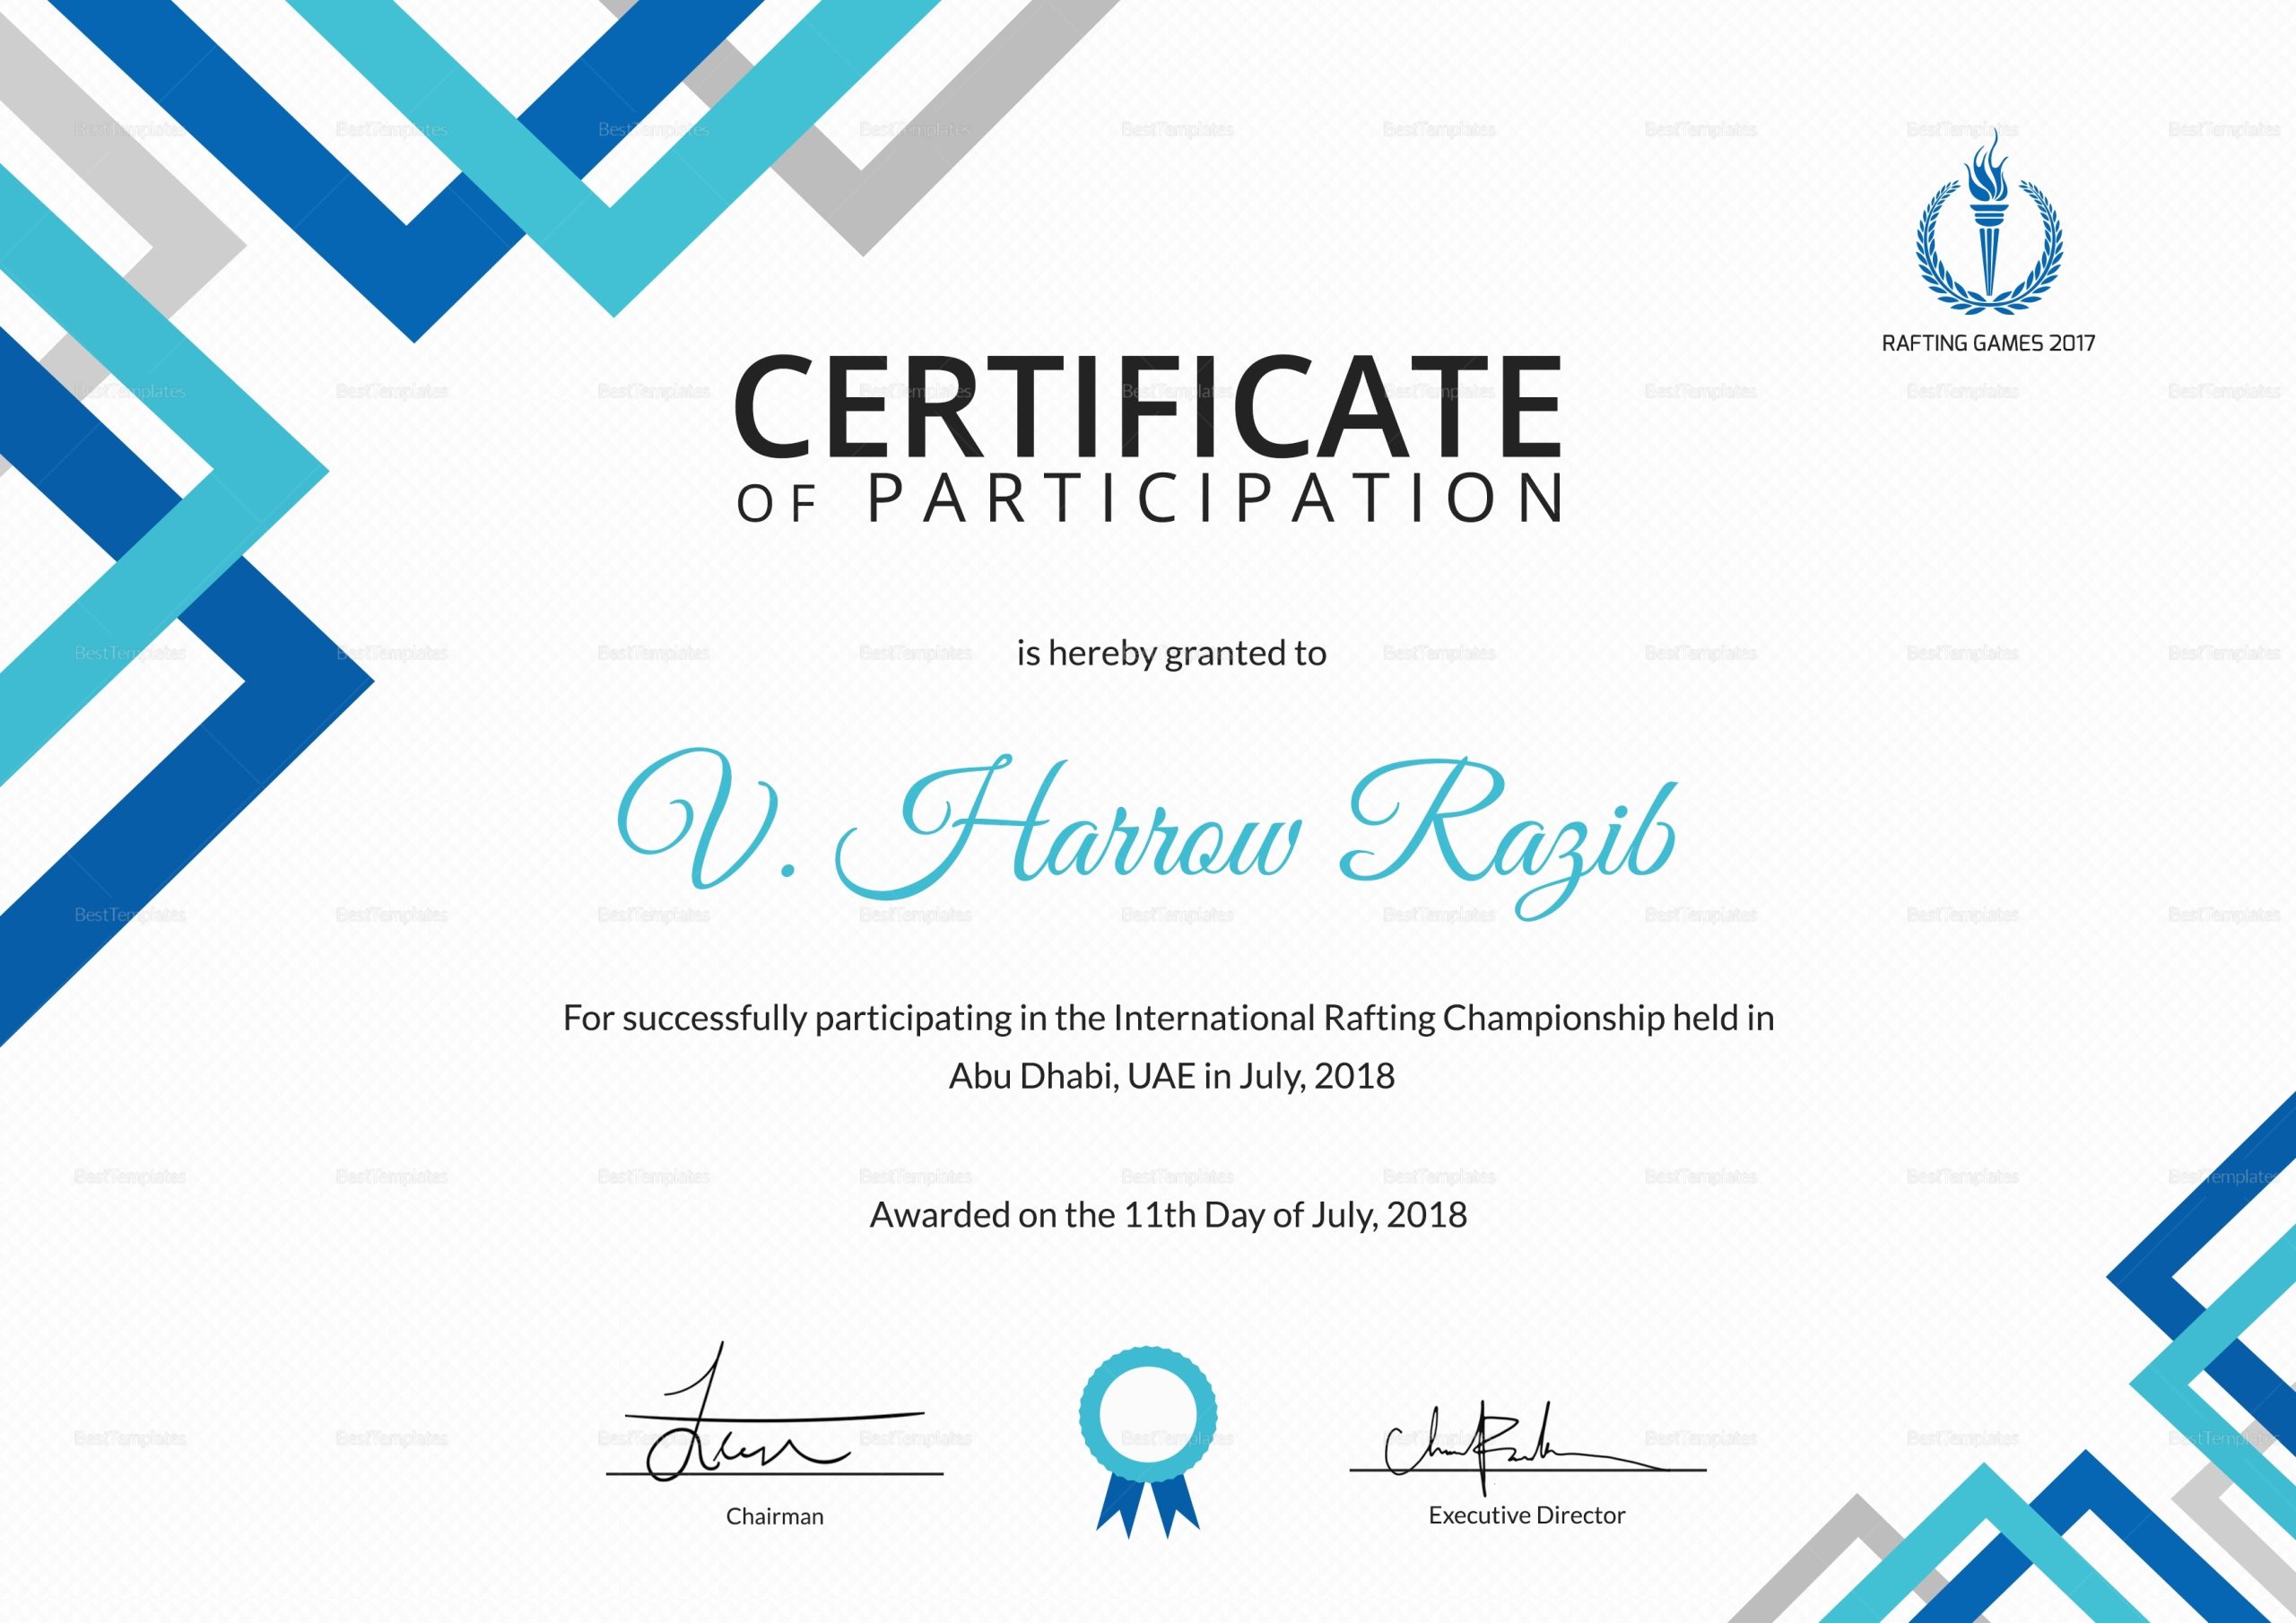 Certificate Of Rafting Participation Design Template In Psd, Word With Regard To Templates For Certificates Of Participation